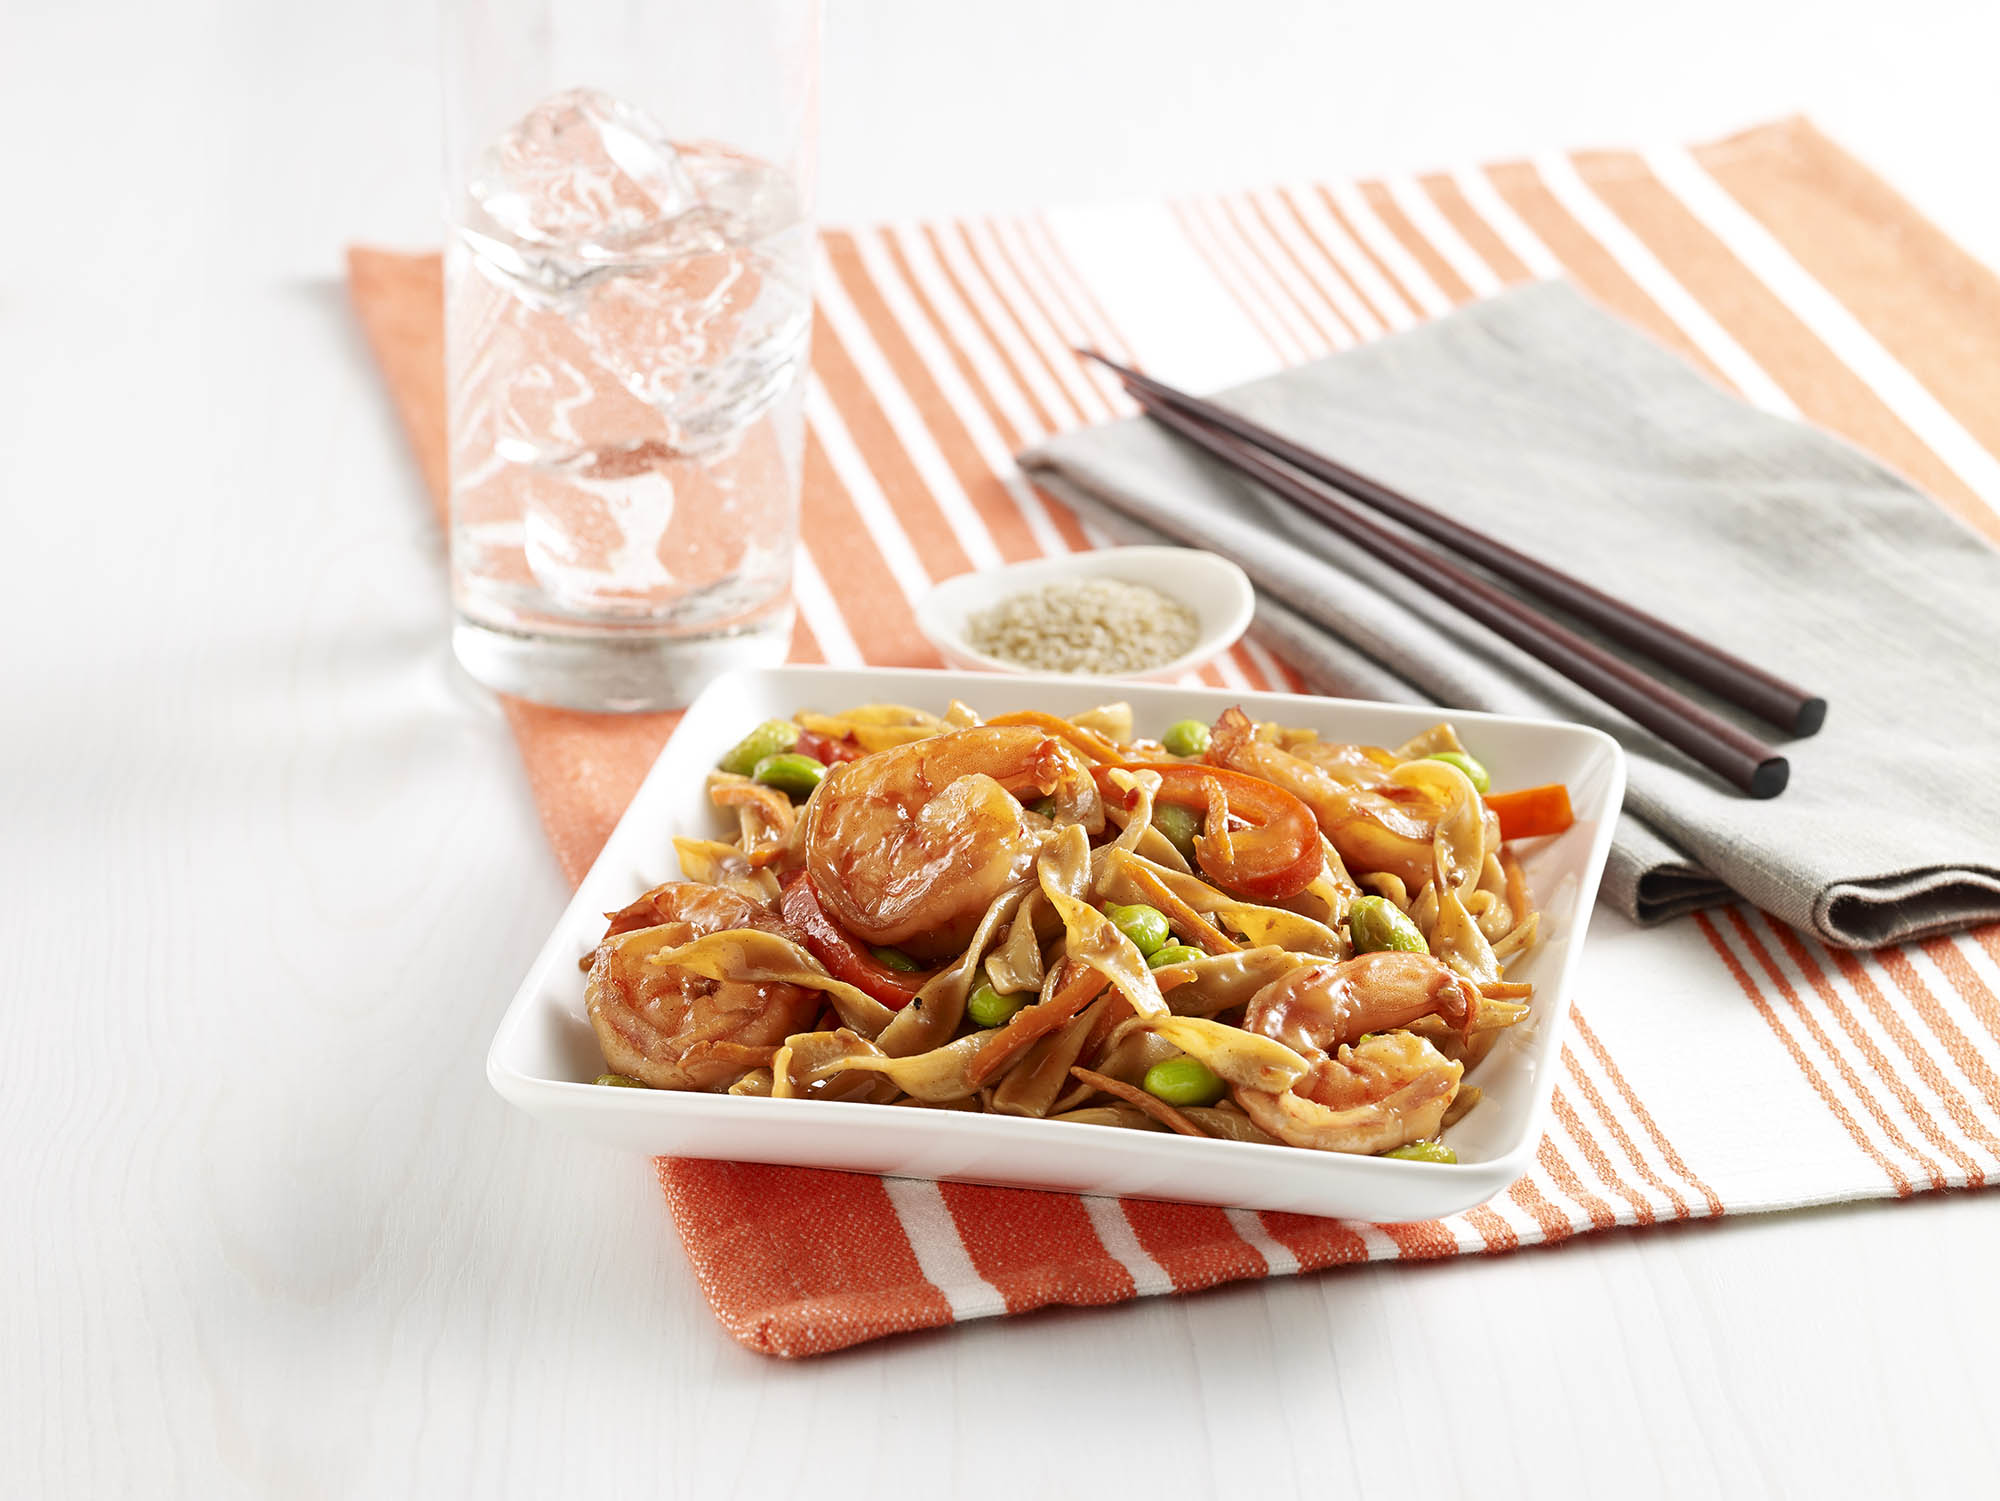 Egg noodles with shrimp, carrots, bell pepper, and edamame in a light soy sauce